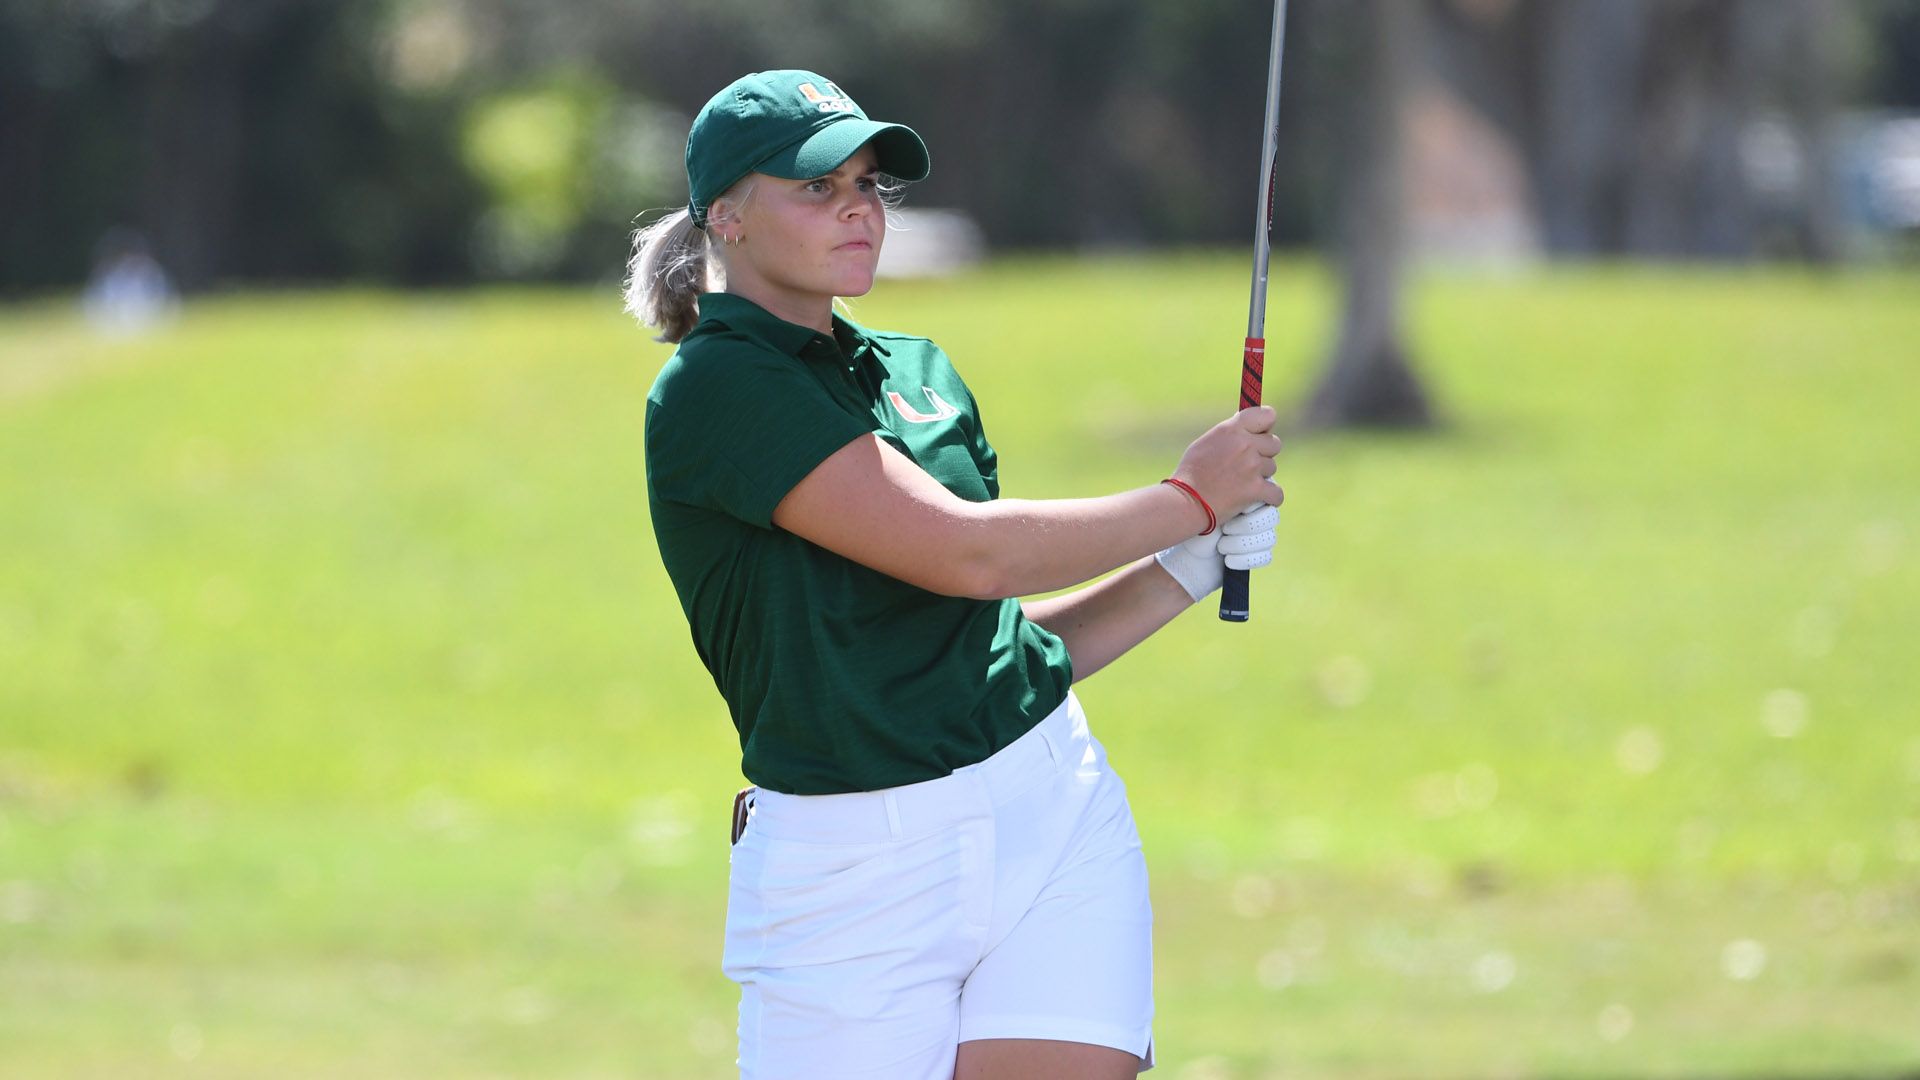 Golf Wraps up Day One of the Hurricane Invitational